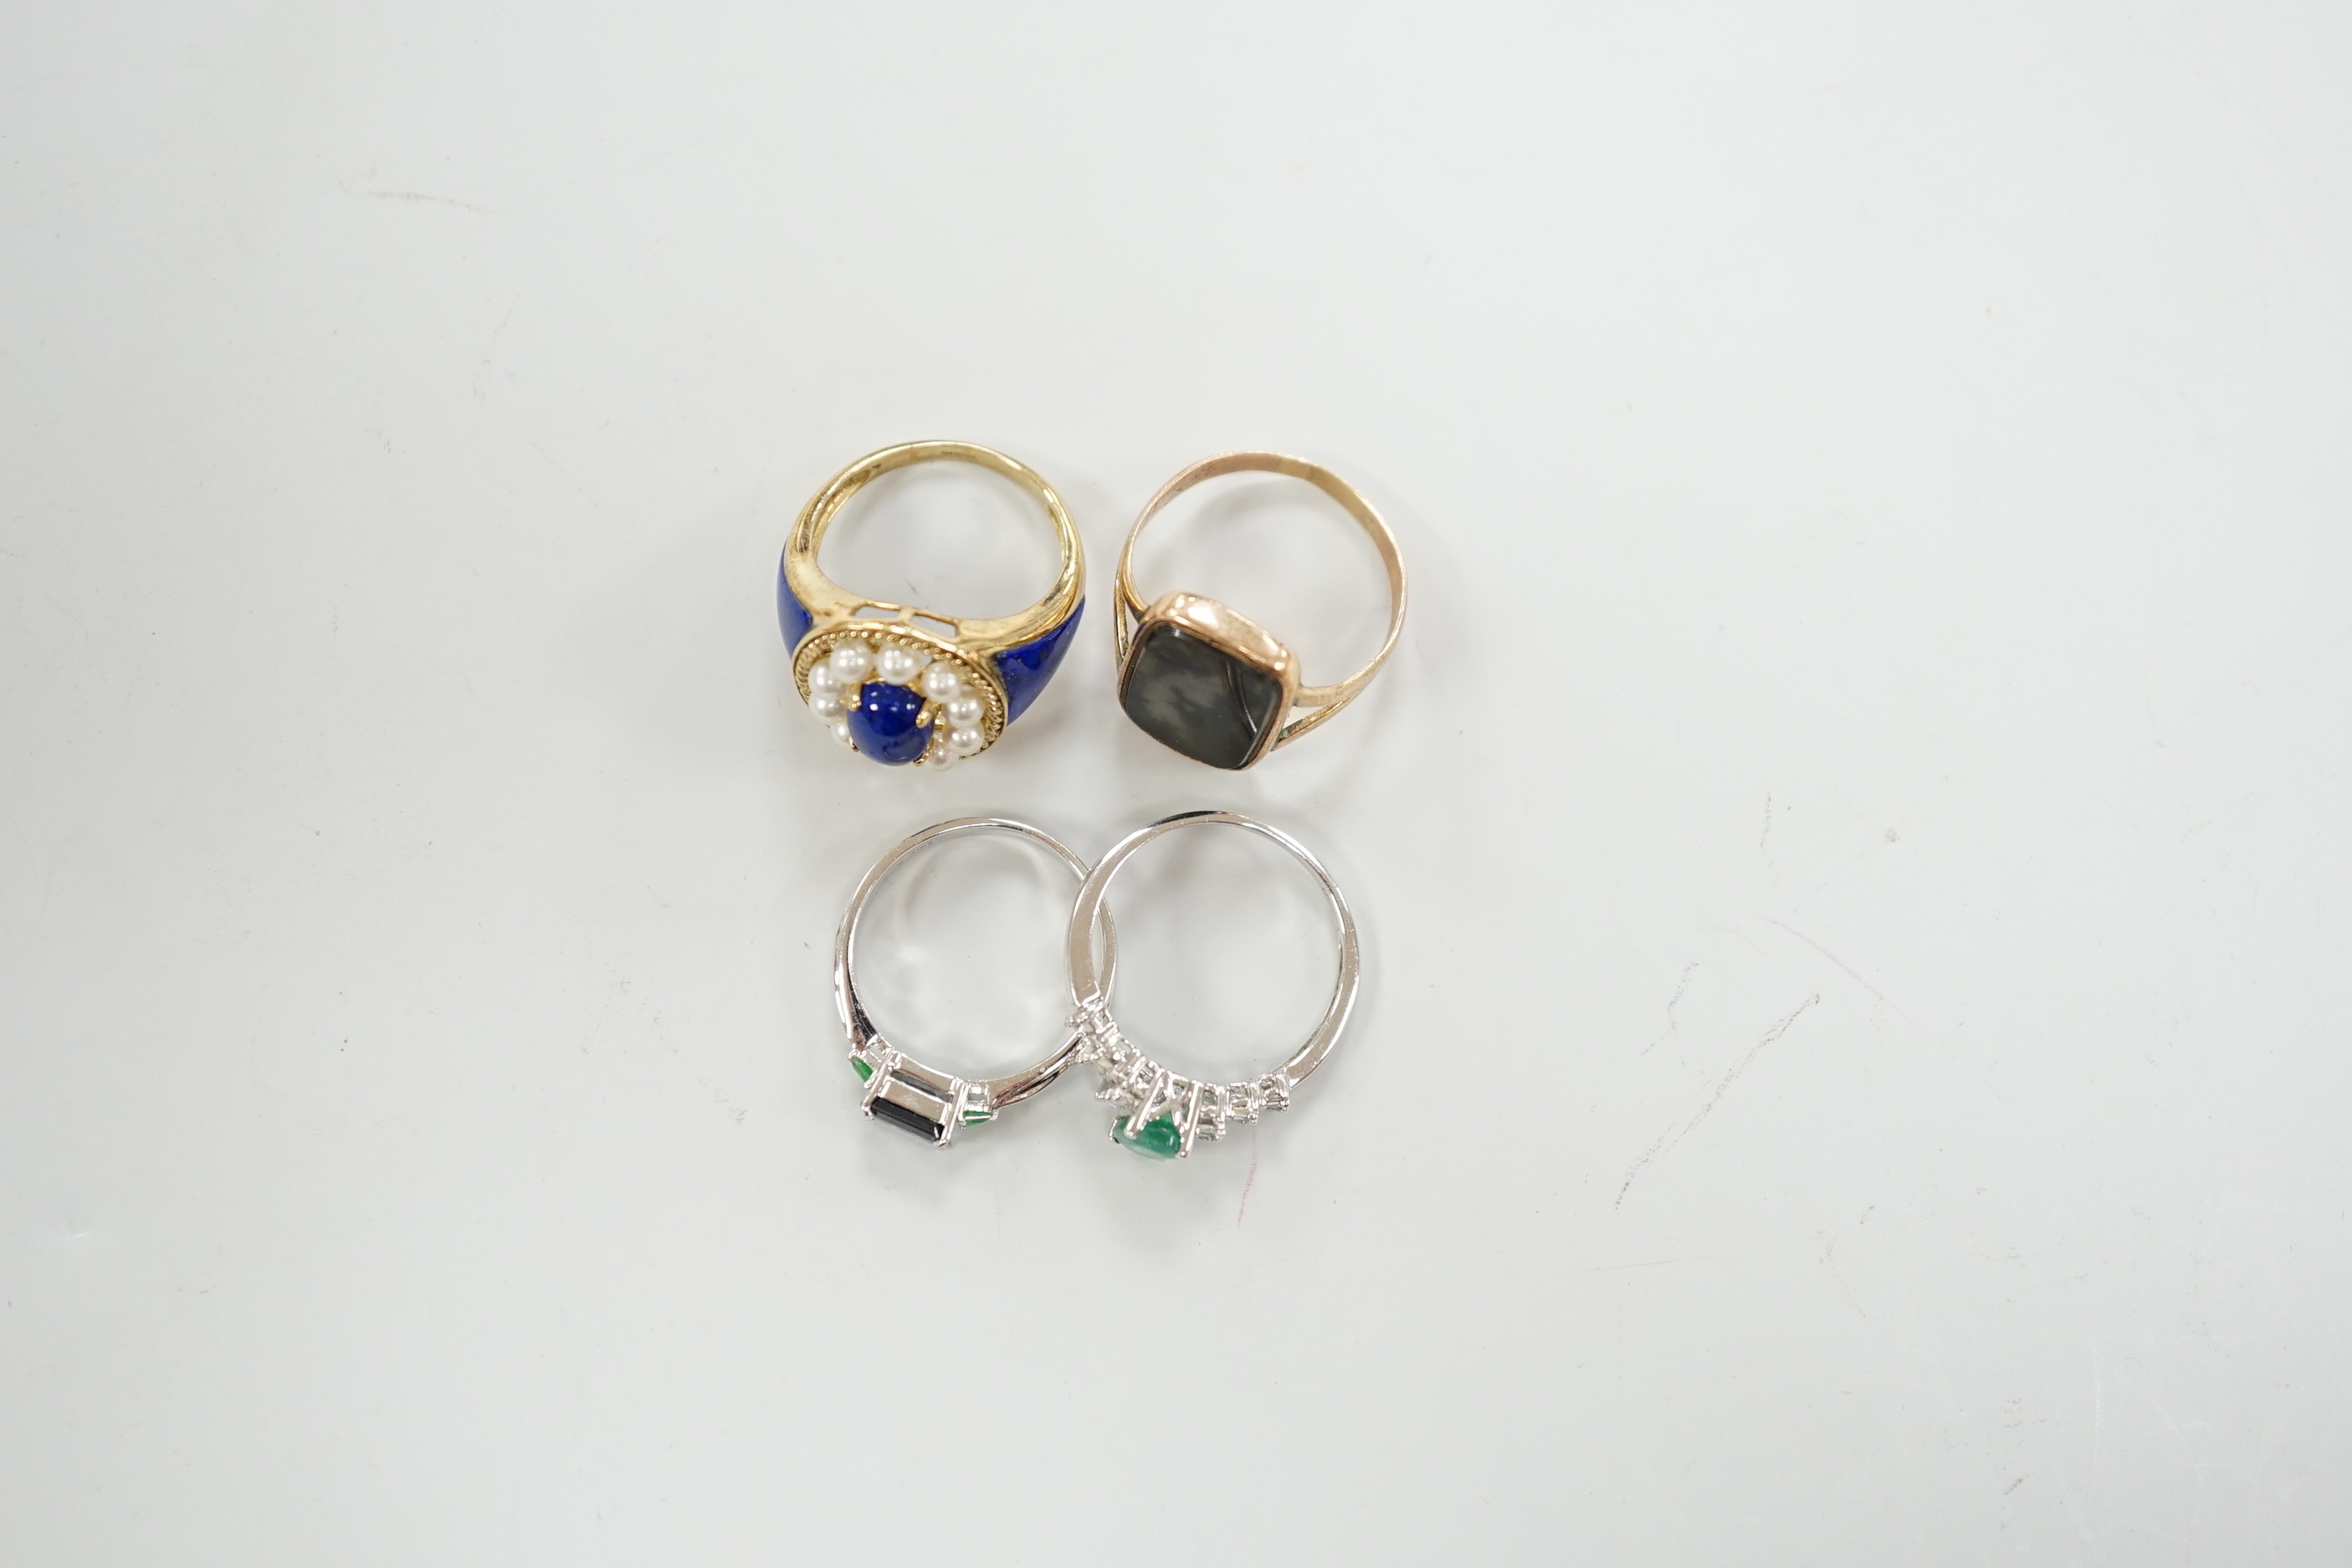 A modern 750 white metal and three stone gem set ring, two 9ct gold and gem set rings including lapis and seed pearl and one other yellow metal ring.